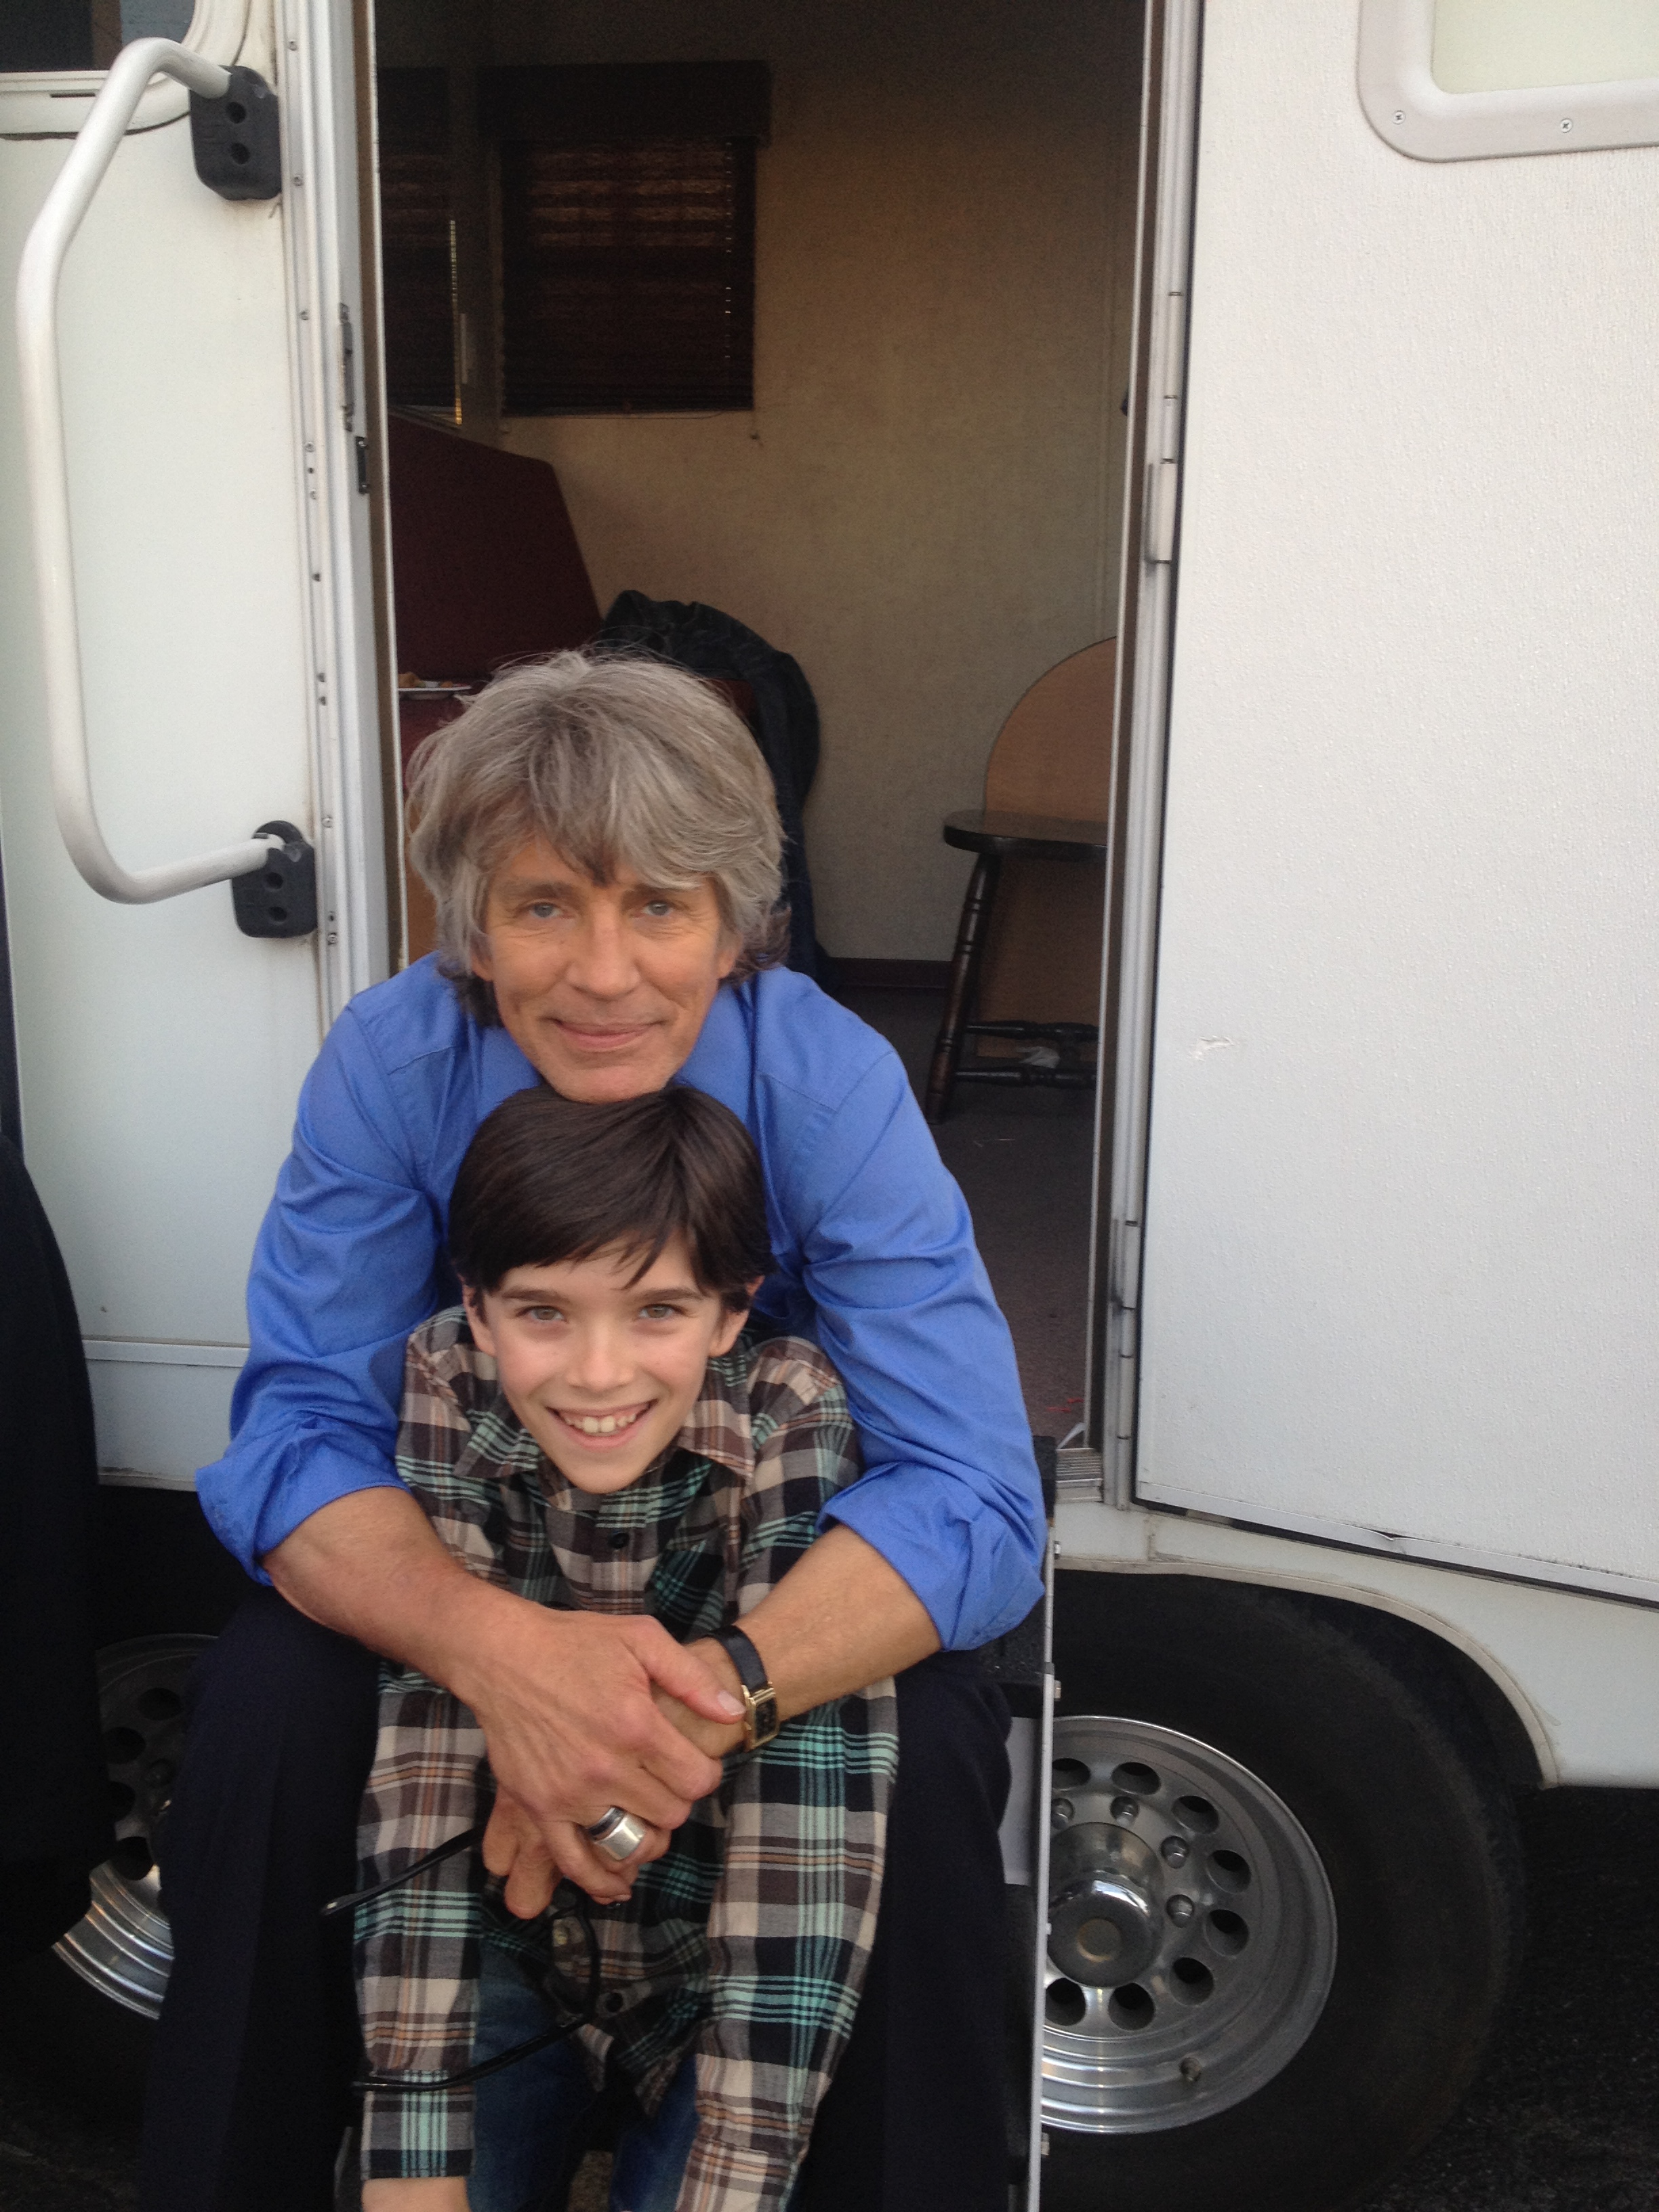 Mateo Simon and Eric Roberts on set filming F.E.A.R. NOT